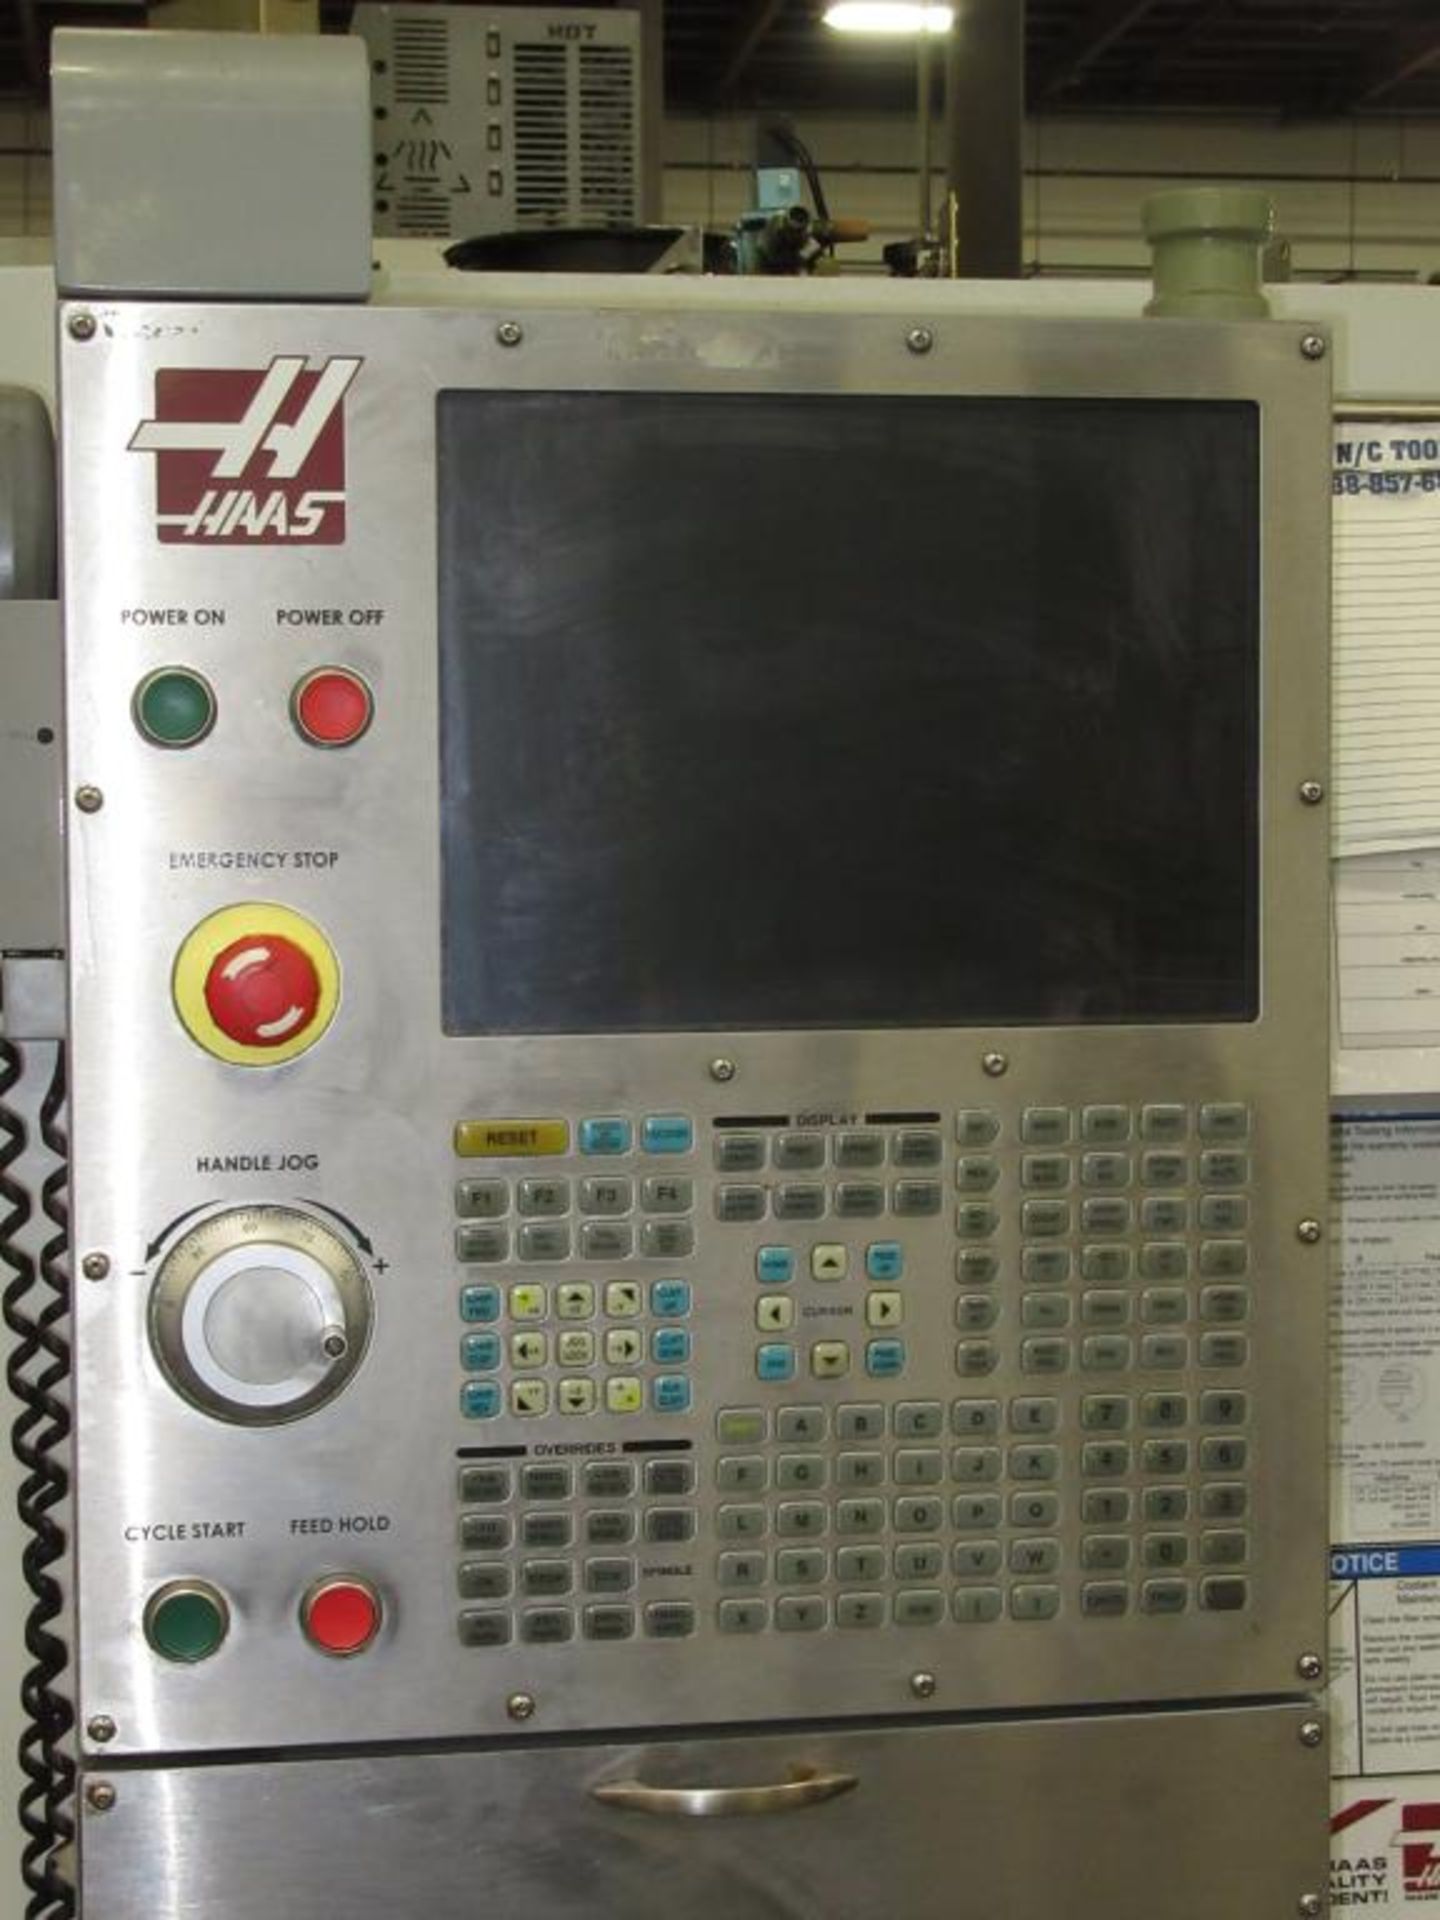 Haas VF-3BYT. 2008 - CNC Vertical Machining Center with Haas 3-Axis Control Panel, Table Size 54"L x - Image 2 of 15